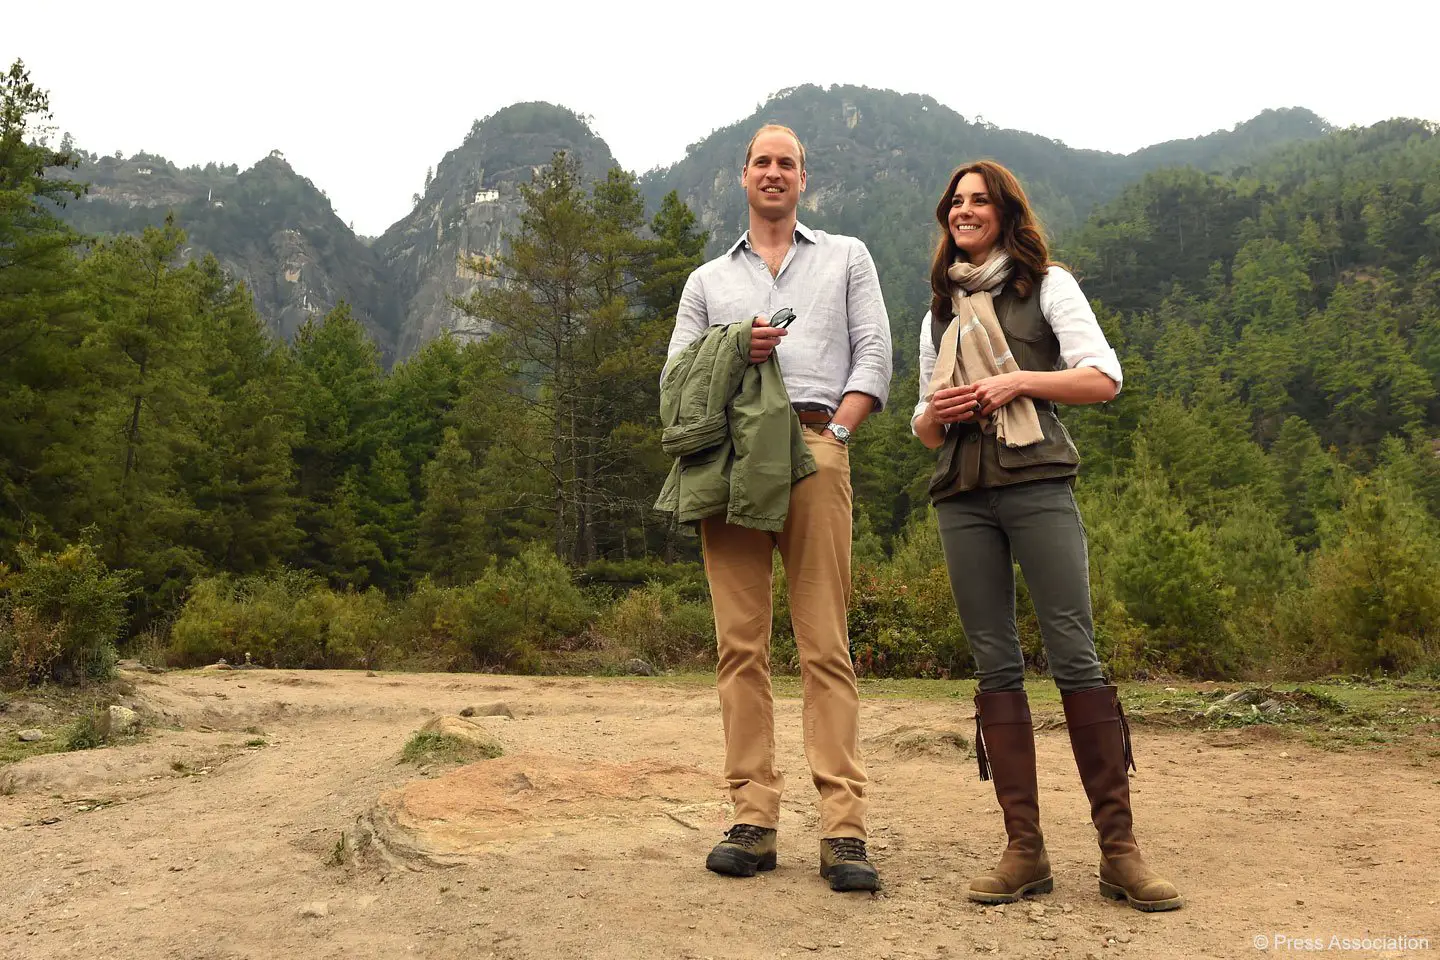 The Duke and Duchess of Cambridge hiked to Paro Taktsang, the Tiger’s Nest monastery during Bhutan visit